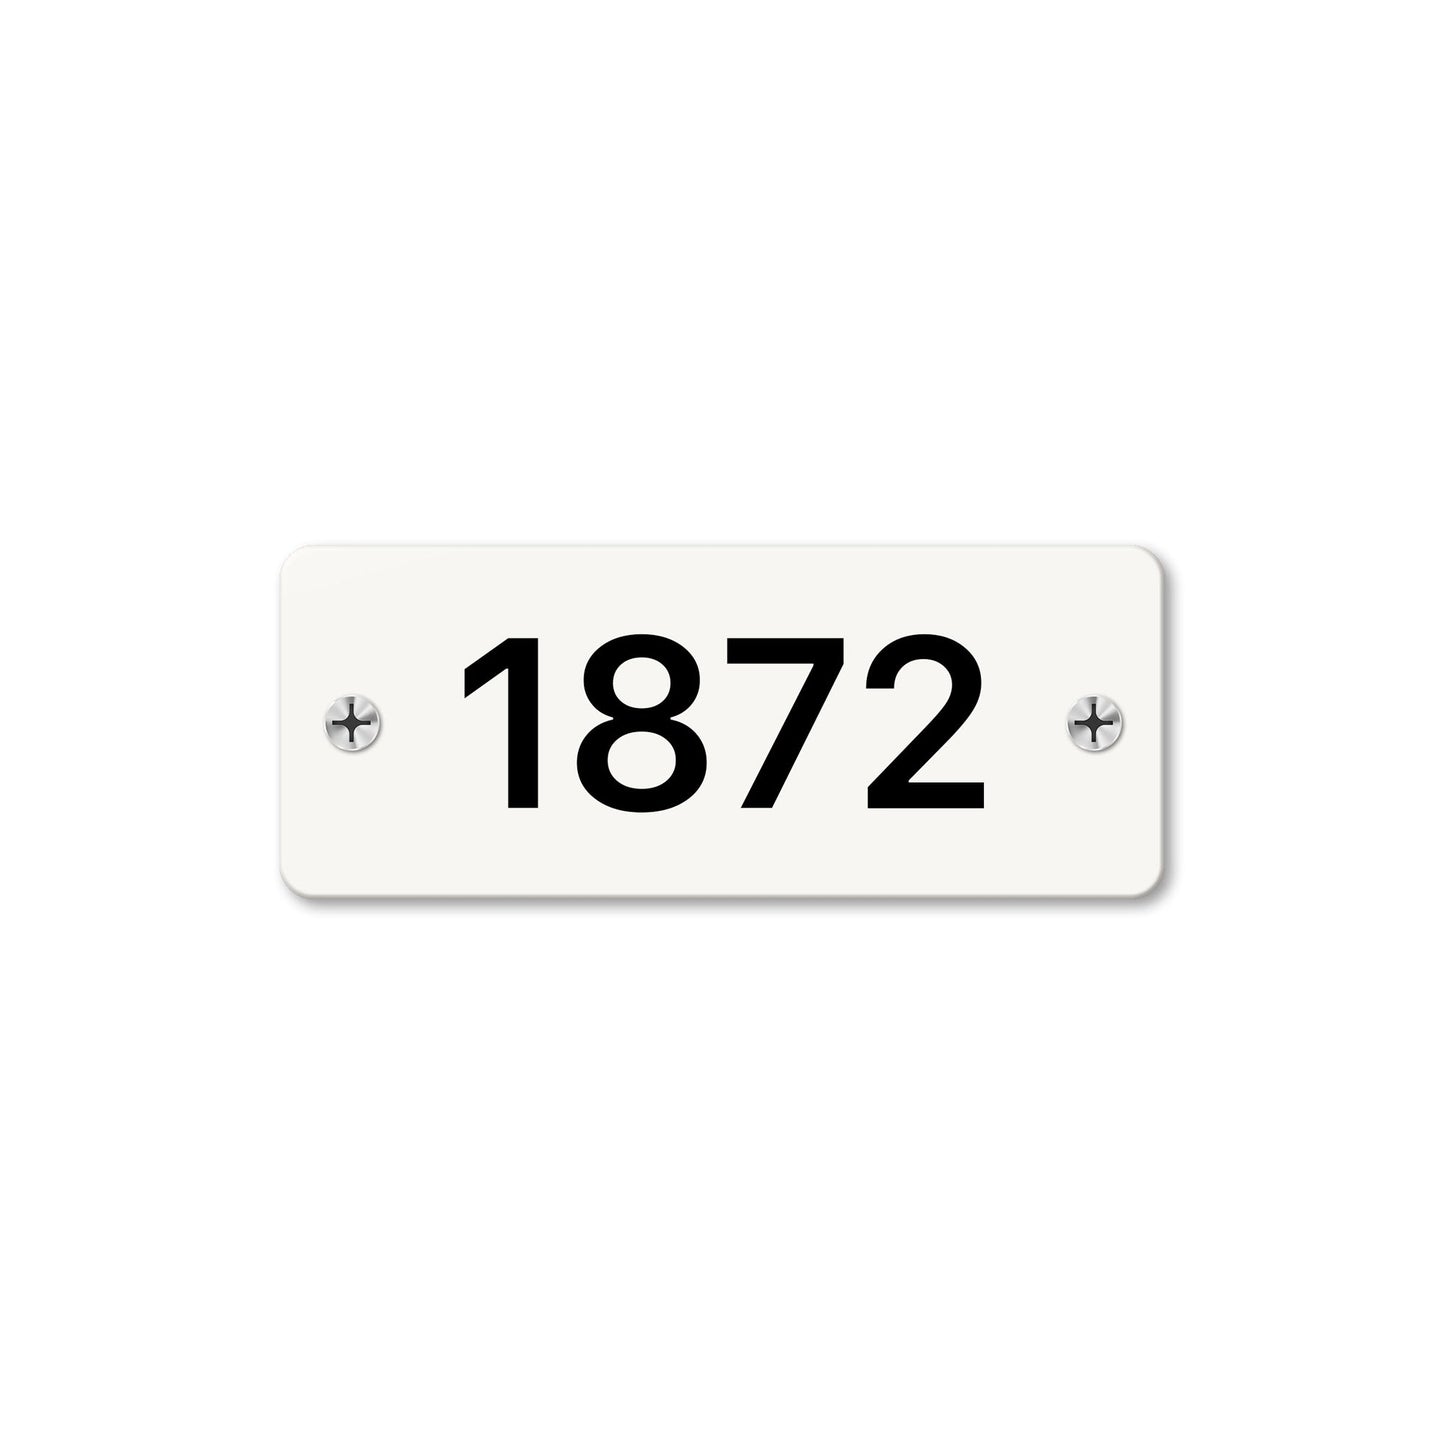 Numeral 1872